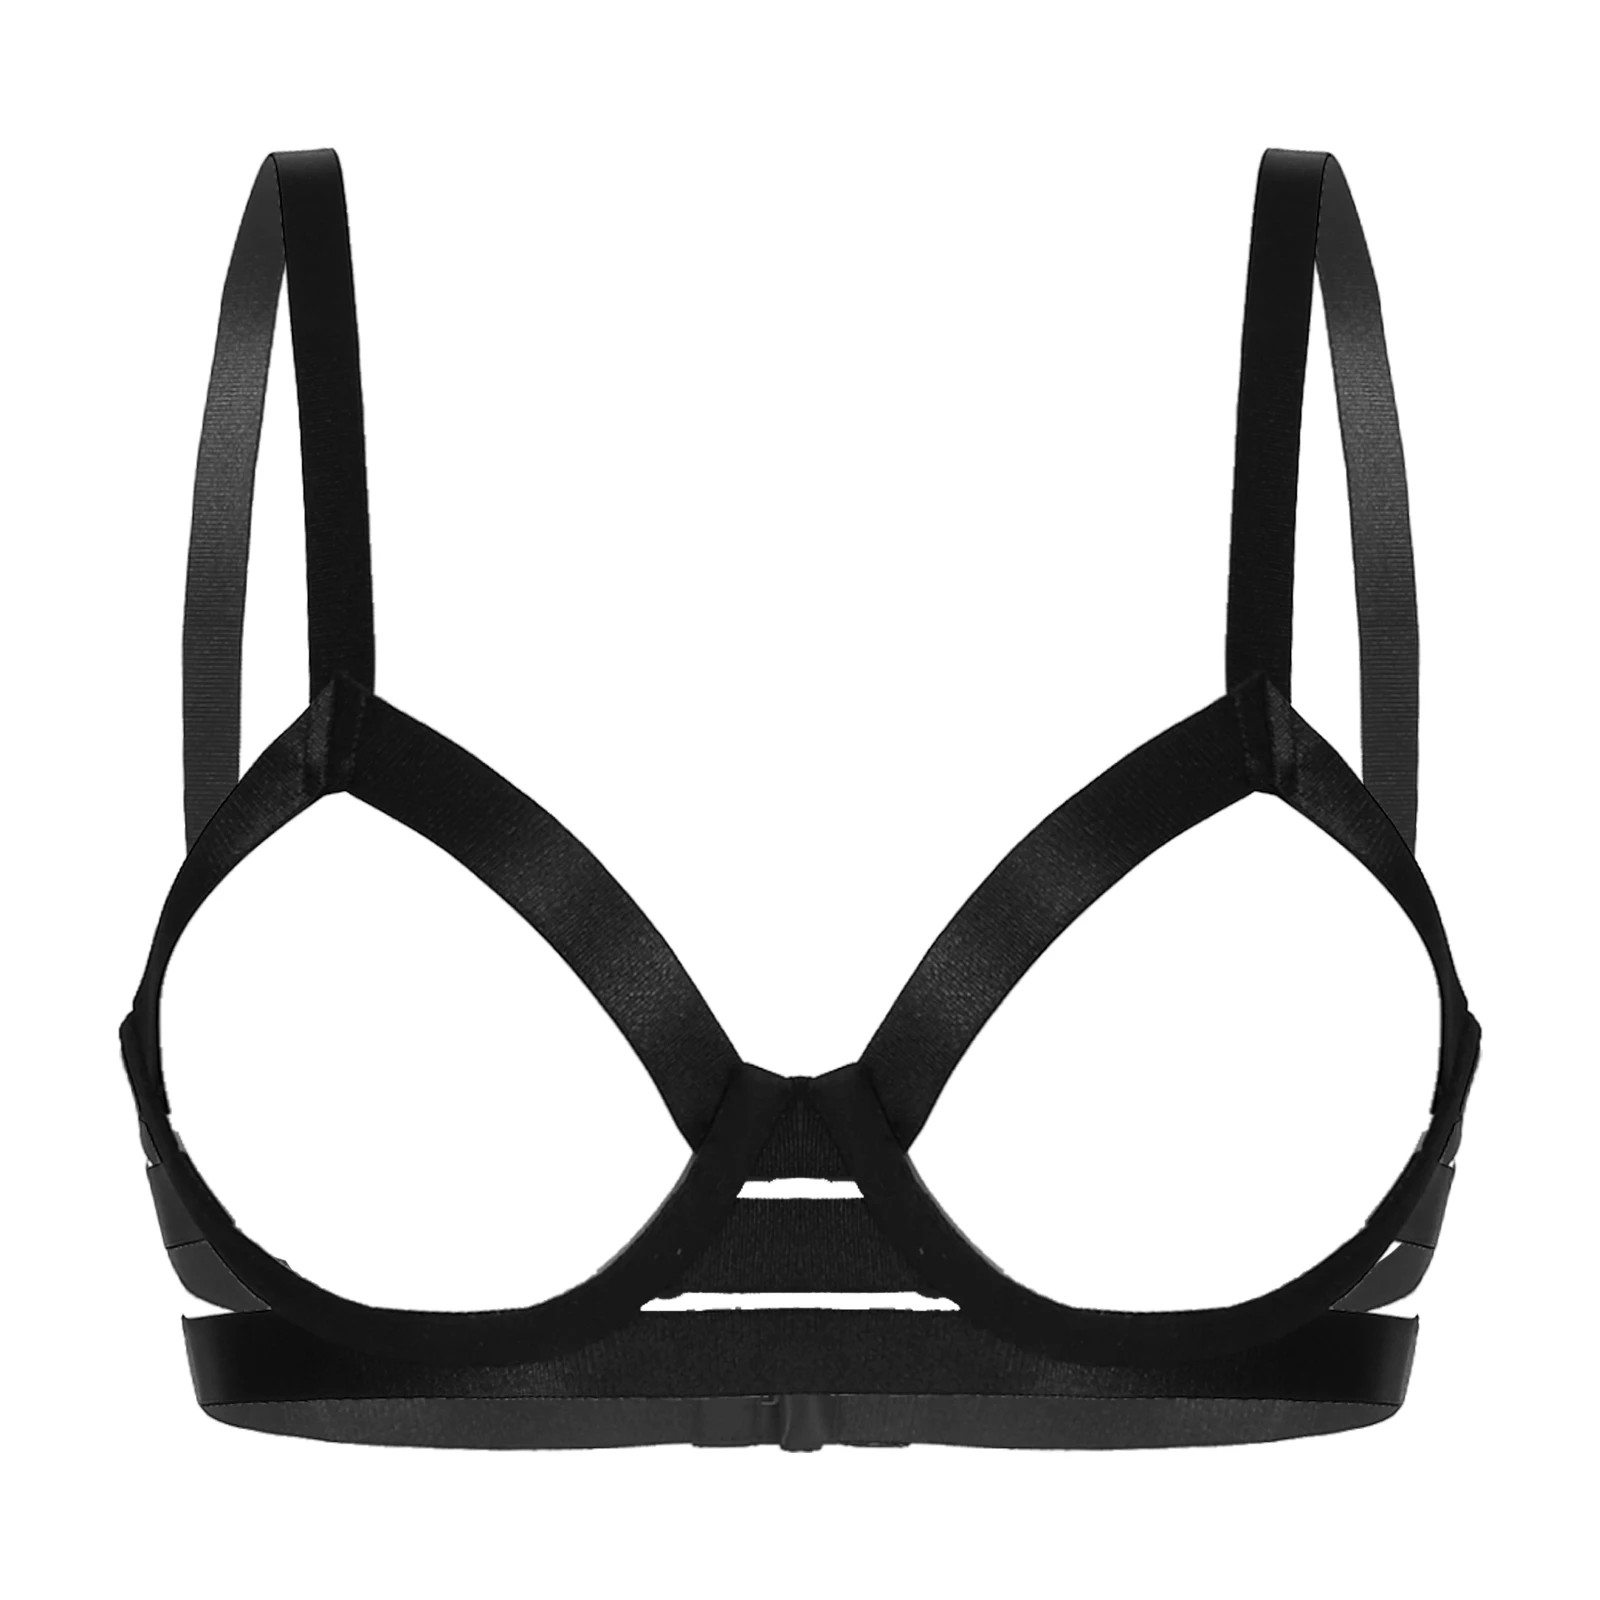 

Sexy Women Plus Size Bra Tops Open Cup Strappy Underwire Bralette Lingerie Underwear Hollow Out Chest Harness Stretchy Brassiere